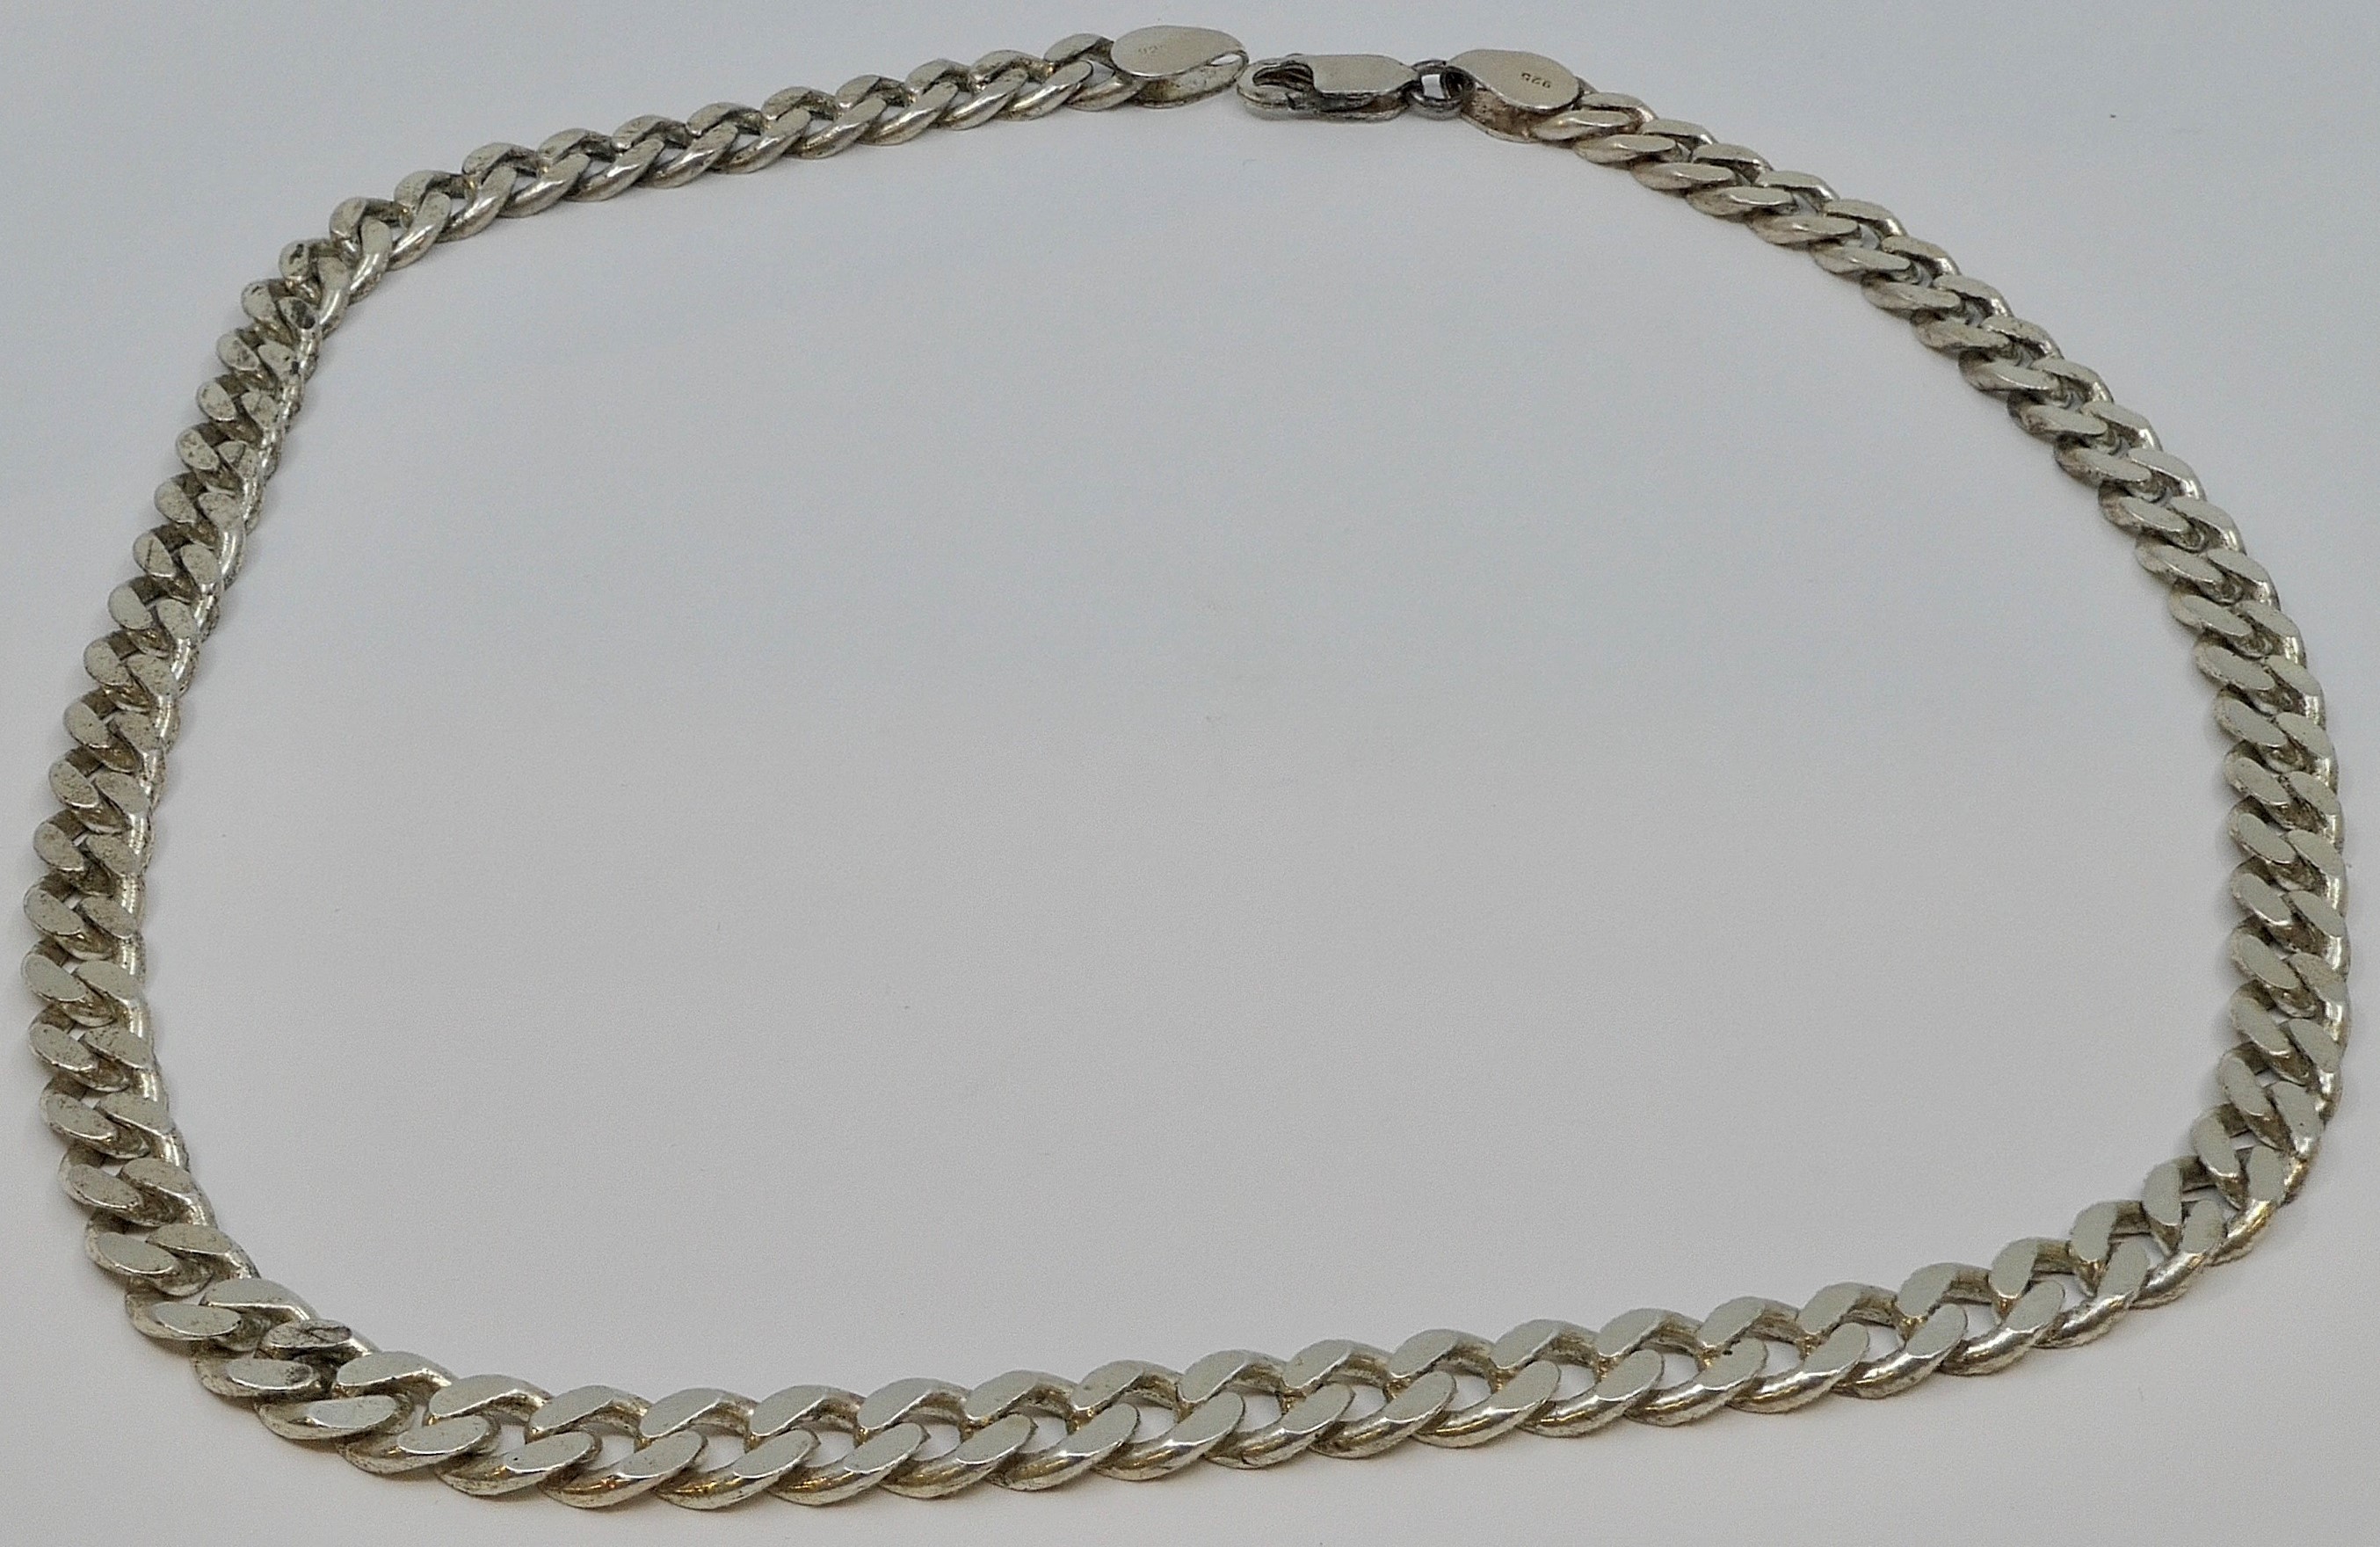 925 white metal curb neck chain, length about 44cm, 1.2 ozt; and a 925 white metal neck chain and - Image 2 of 3